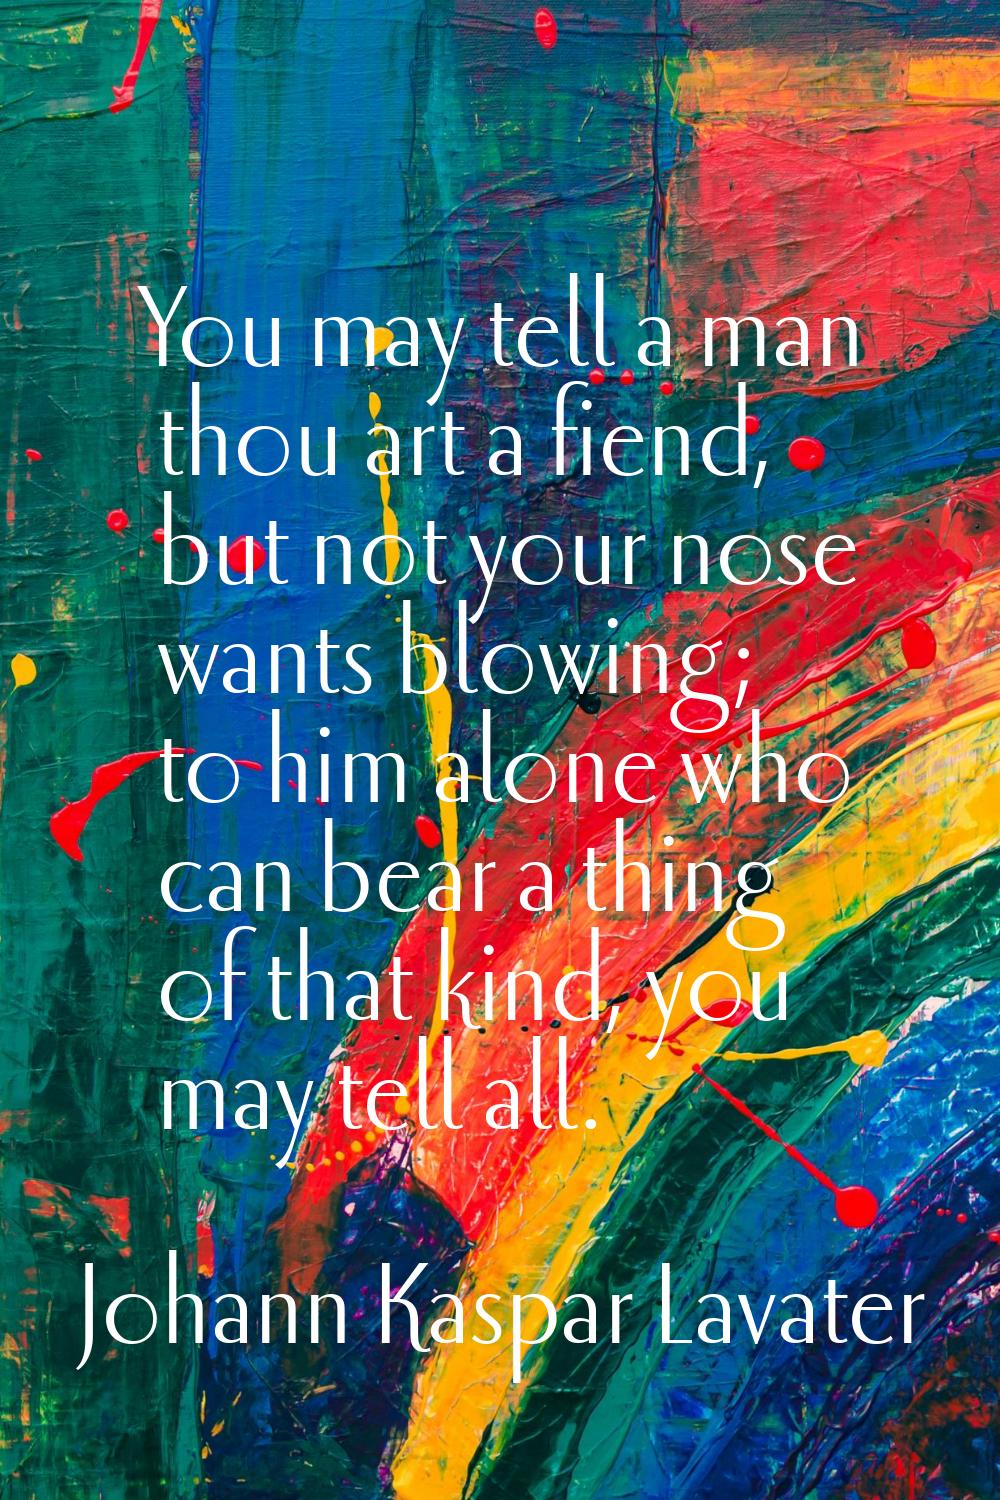 You may tell a man thou art a fiend, but not your nose wants blowing; to him alone who can bear a t